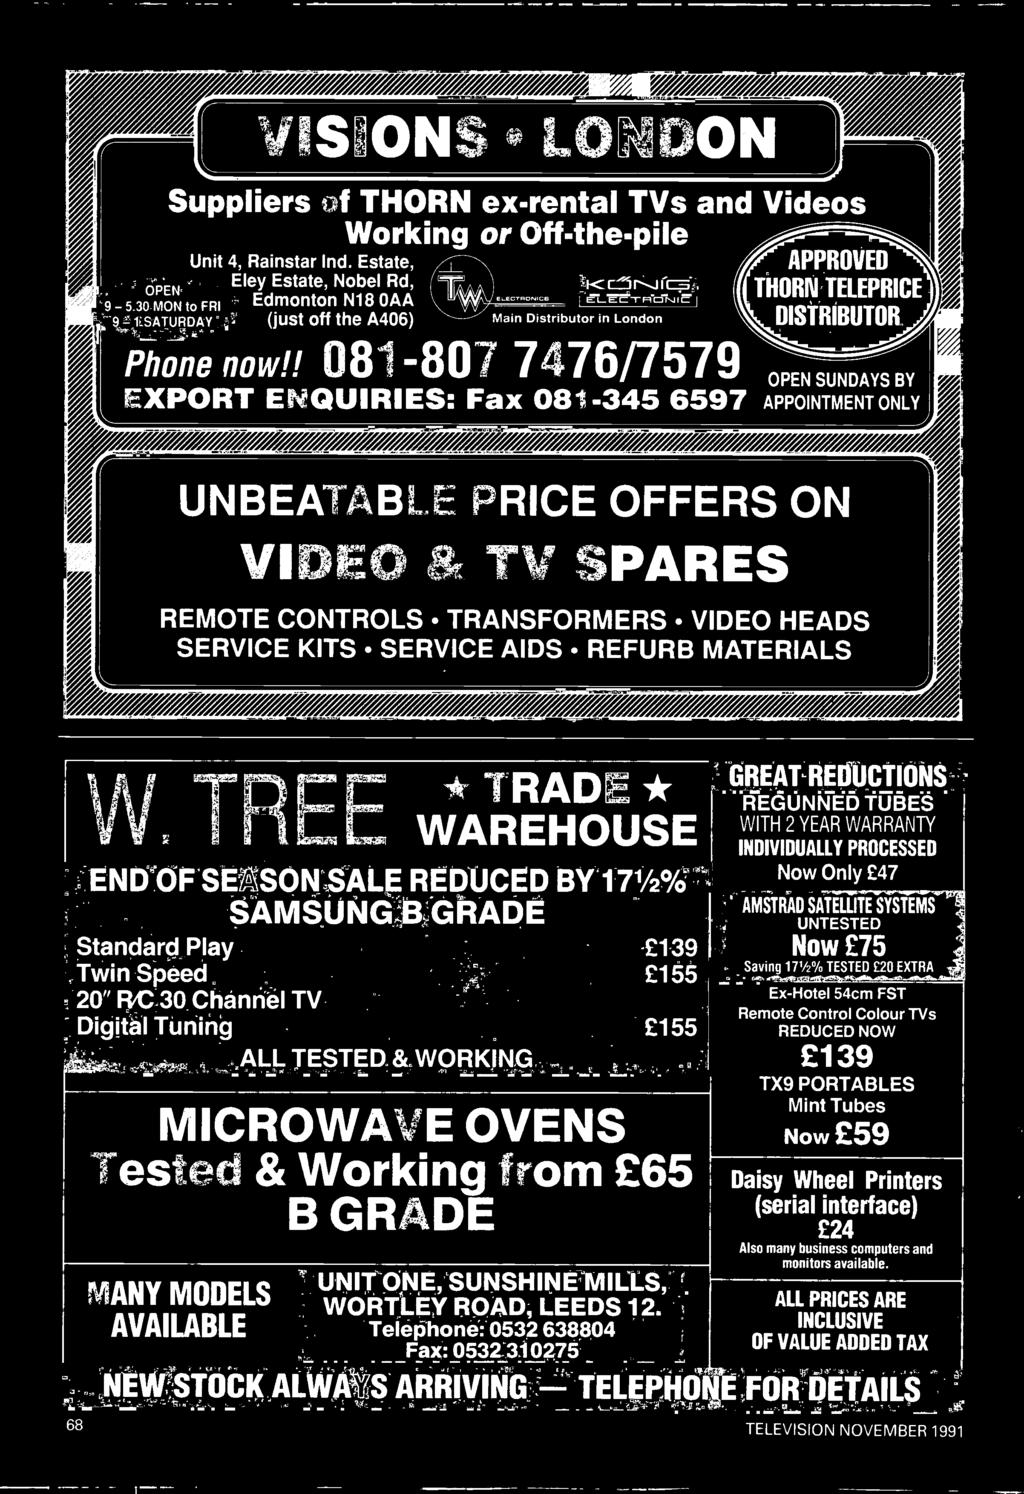 TREE * TRADE * WAREHOUSE END OF SEASON SALE REDUCED BY 171/2% SAMSUNG B GRADE Standard Play Twin Speed 20"R/C 30 Channel TV Digital Tuning ALL TESTED & WORKING 68 139 155 155 MICROWAVE OVENS Tested &